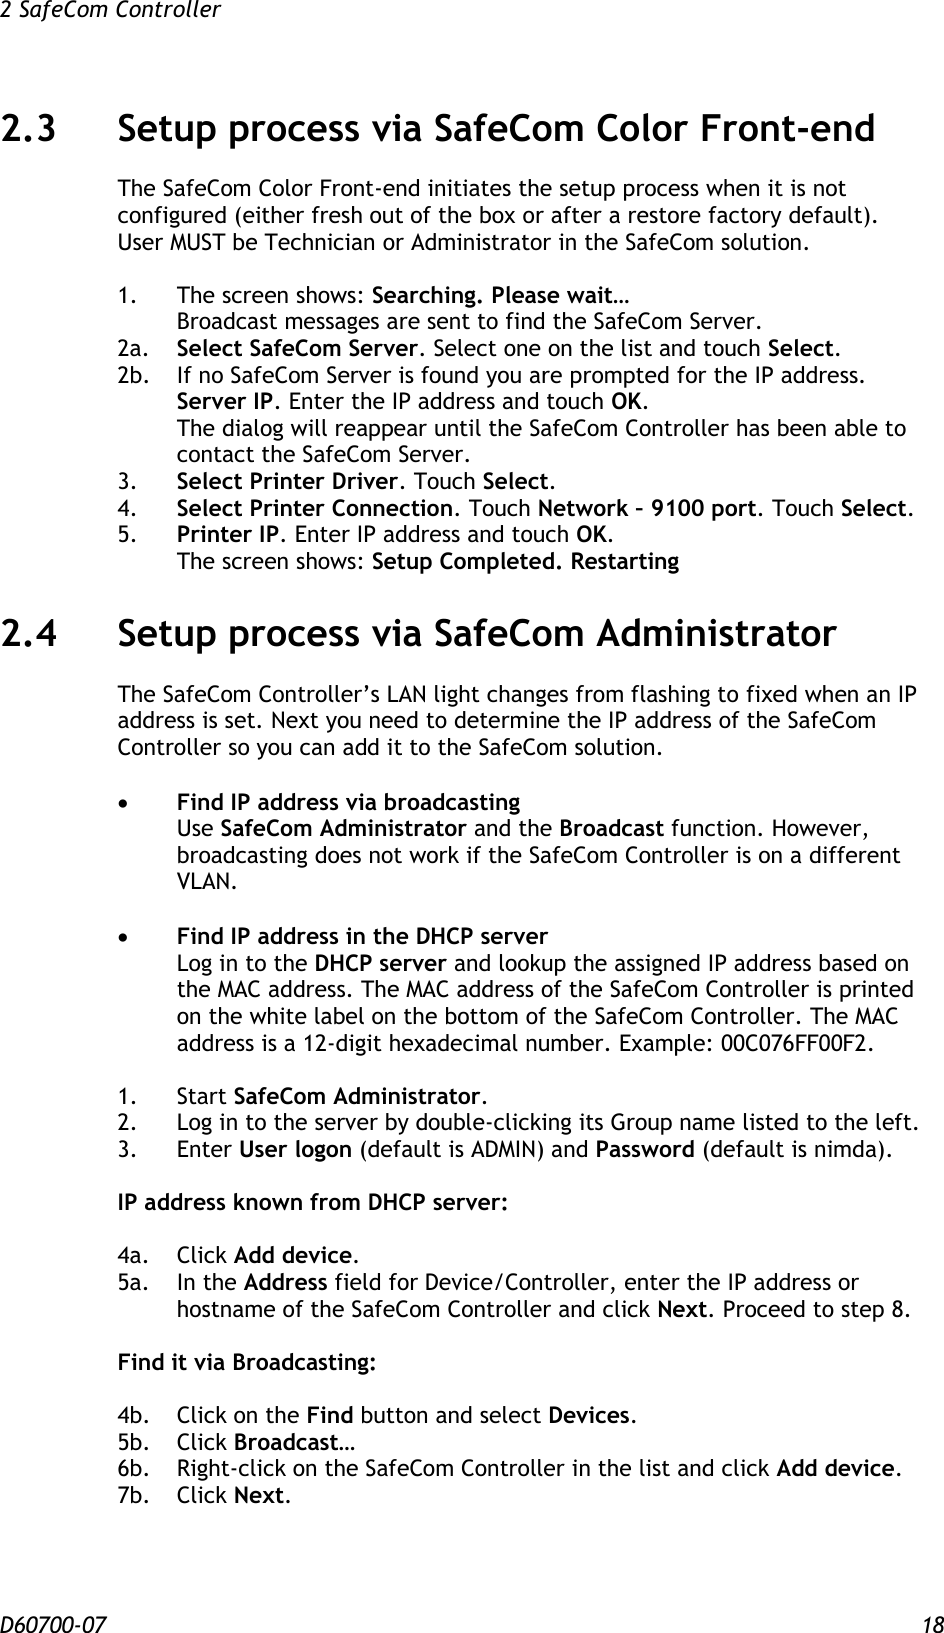 2 SafeCom Controller  D60700-07 18 2.3 Setup process via SafeCom Color Front-end The SafeCom Color Front-end initiates the setup process when it is not configured (either fresh out of the box or after a restore factory default). User MUST be Technician or Administrator in the SafeCom solution.  1.  The screen shows: Searching. Please wait… Broadcast messages are sent to find the SafeCom Server. 2a.  Select SafeCom Server. Select one on the list and touch Select. 2b.  If no SafeCom Server is found you are prompted for the IP address. Server IP. Enter the IP address and touch OK. The dialog will reappear until the SafeCom Controller has been able to contact the SafeCom Server. 3. Select Printer Driver. Touch Select. 4. Select Printer Connection. Touch Network – 9100 port. Touch Select. 5. Printer IP. Enter IP address and touch OK. The screen shows: Setup Completed. Restarting 2.4 Setup process via SafeCom Administrator The SafeCom Controller’s LAN light changes from flashing to fixed when an IP address is set. Next you need to determine the IP address of the SafeCom Controller so you can add it to the SafeCom solution.   Find IP address via broadcasting Use SafeCom Administrator and the Broadcast function. However, broadcasting does not work if the SafeCom Controller is on a different VLAN.   Find IP address in the DHCP server Log in to the DHCP server and lookup the assigned IP address based on the MAC address. The MAC address of the SafeCom Controller is printed on the white label on the bottom of the SafeCom Controller. The MAC address is a 12-digit hexadecimal number. Example: 00C076FF00F2.  1.  Start SafeCom Administrator. 2.  Log in to the server by double-clicking its Group name listed to the left. 3.  Enter User logon (default is ADMIN) and Password (default is nimda).  IP address known from DHCP server:  4a.  Click Add device. 5a.  In the Address field for Device/Controller, enter the IP address or hostname of the SafeCom Controller and click Next. Proceed to step 8.  Find it via Broadcasting:  4b.  Click on the Find button and select Devices. 5b.  Click Broadcast… 6b.  Right-click on the SafeCom Controller in the list and click Add device. 7b.  Click Next.   